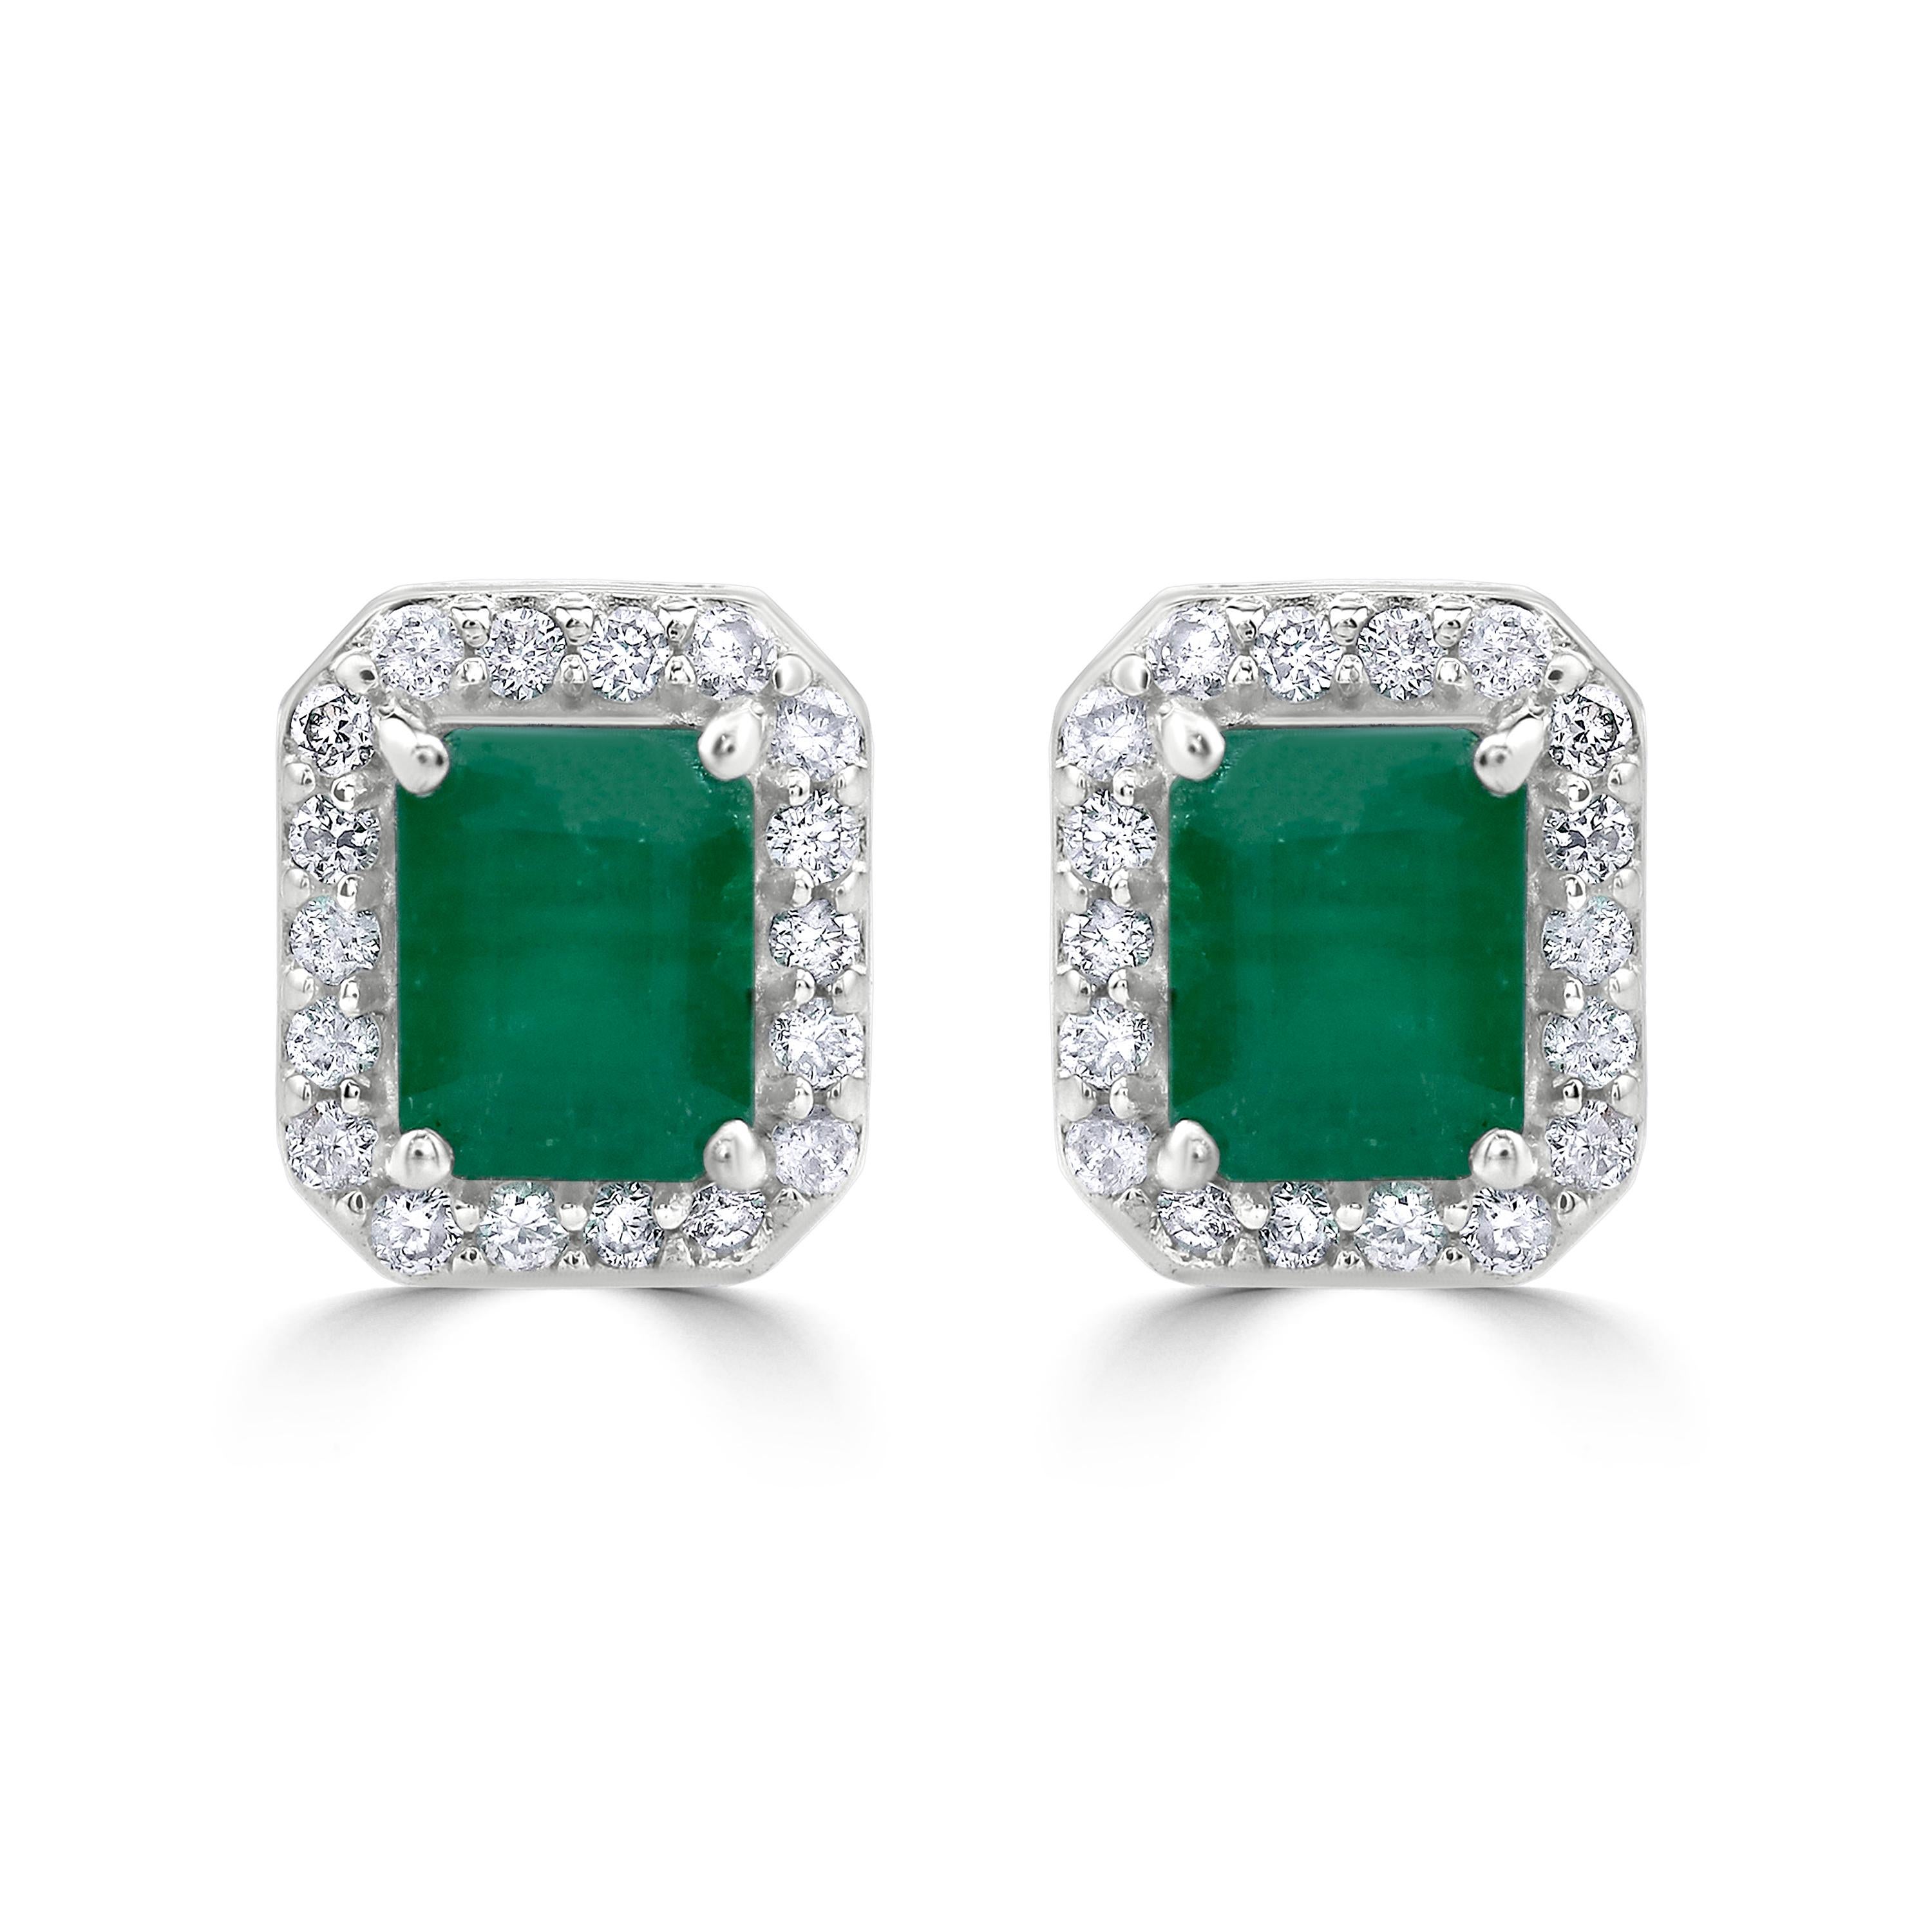 Octagon Cut Gemistry .98 Carats Octagon Emerald Stud Earrings with Diamond in 14K White Gold